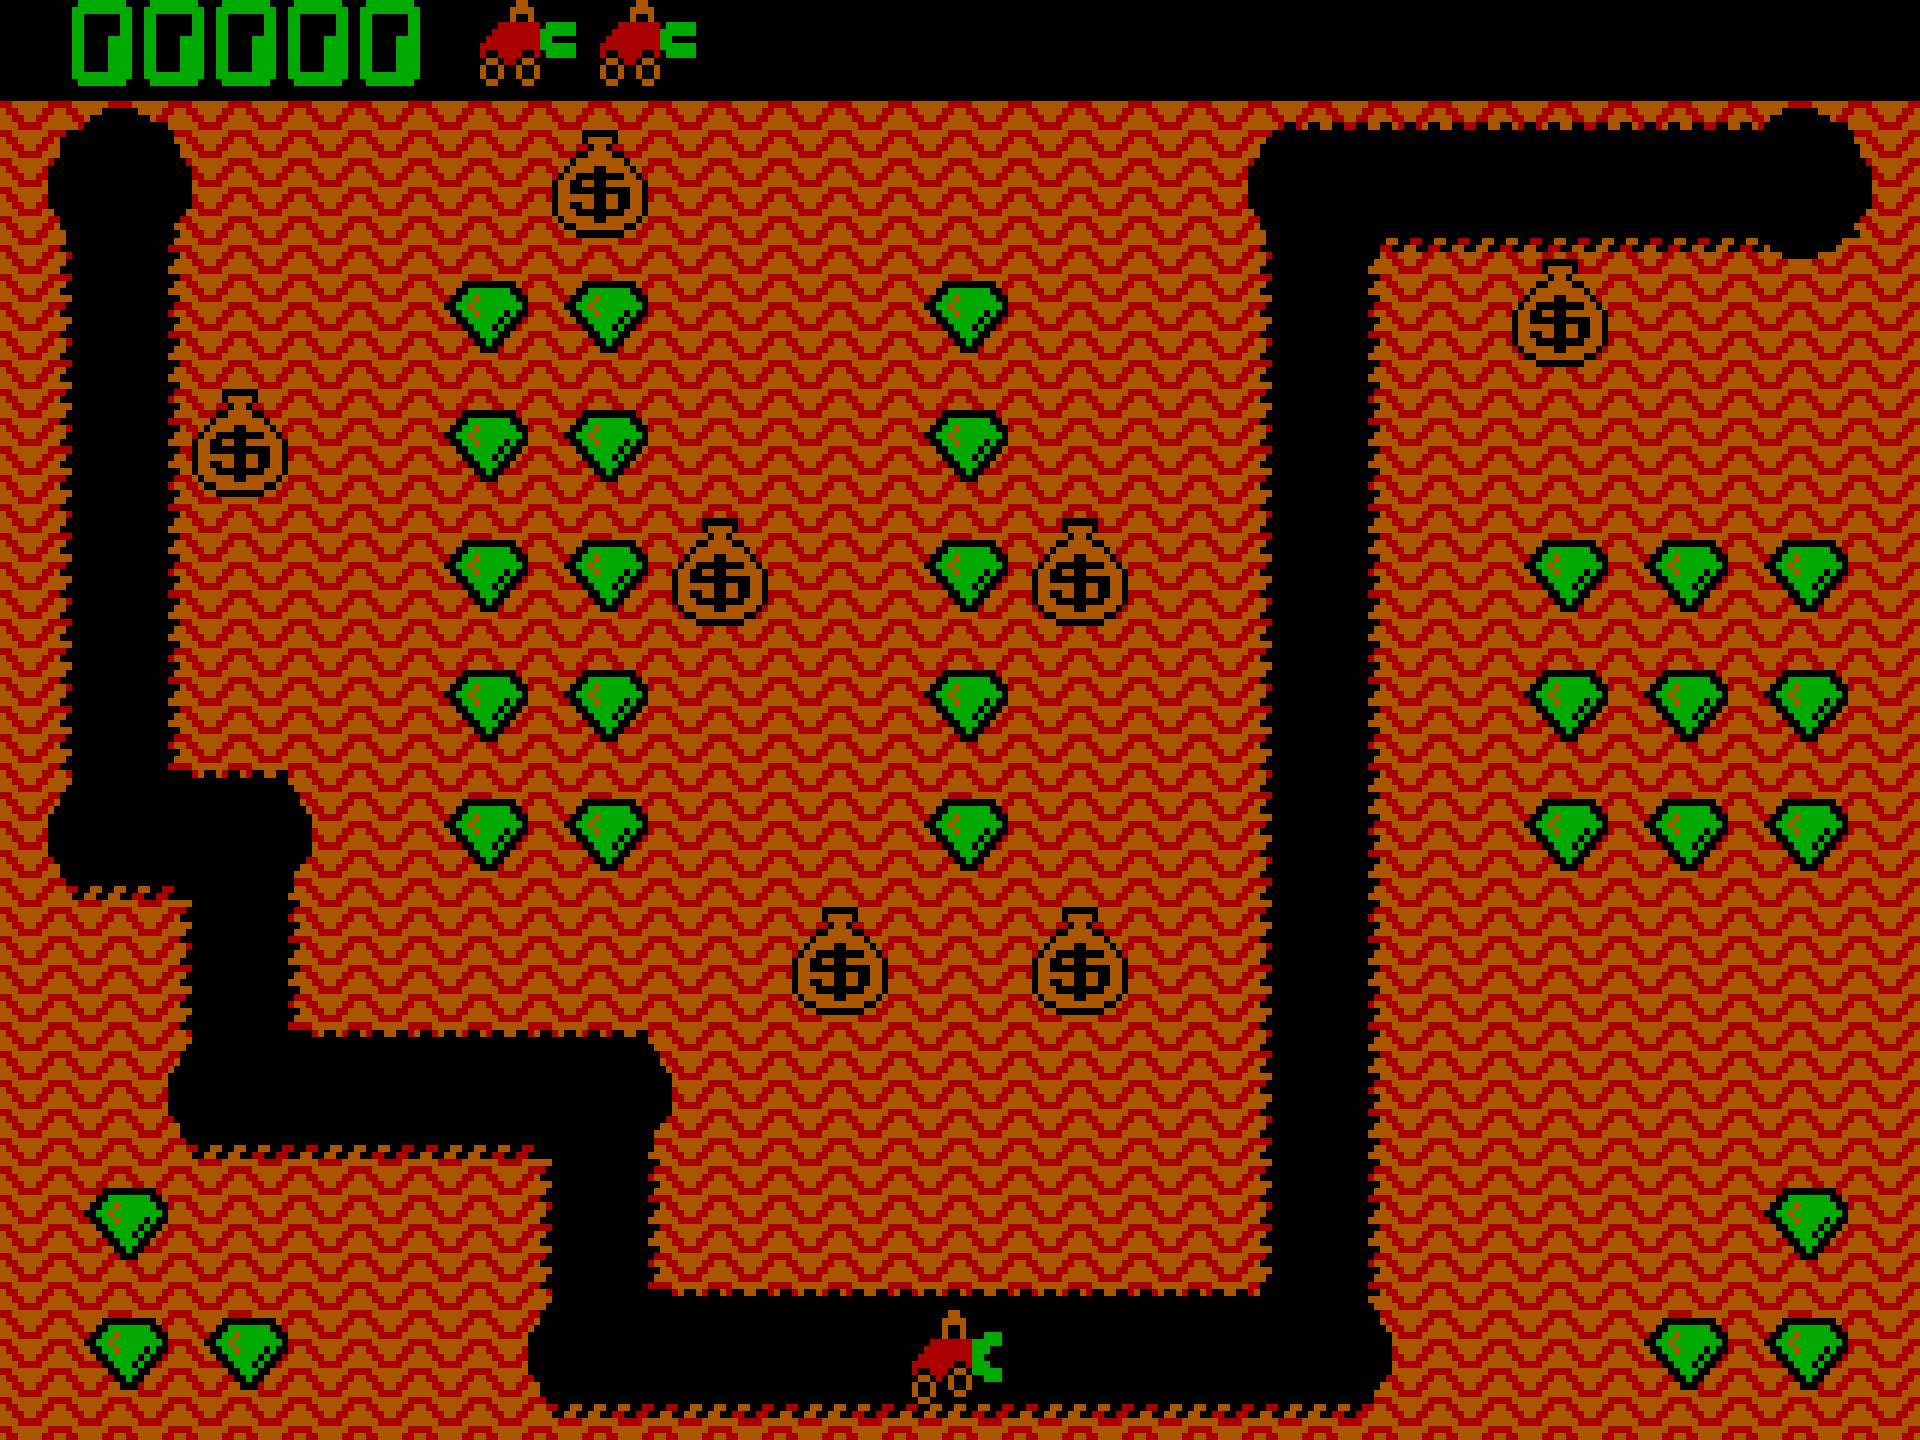 An animated image of a game of Digger